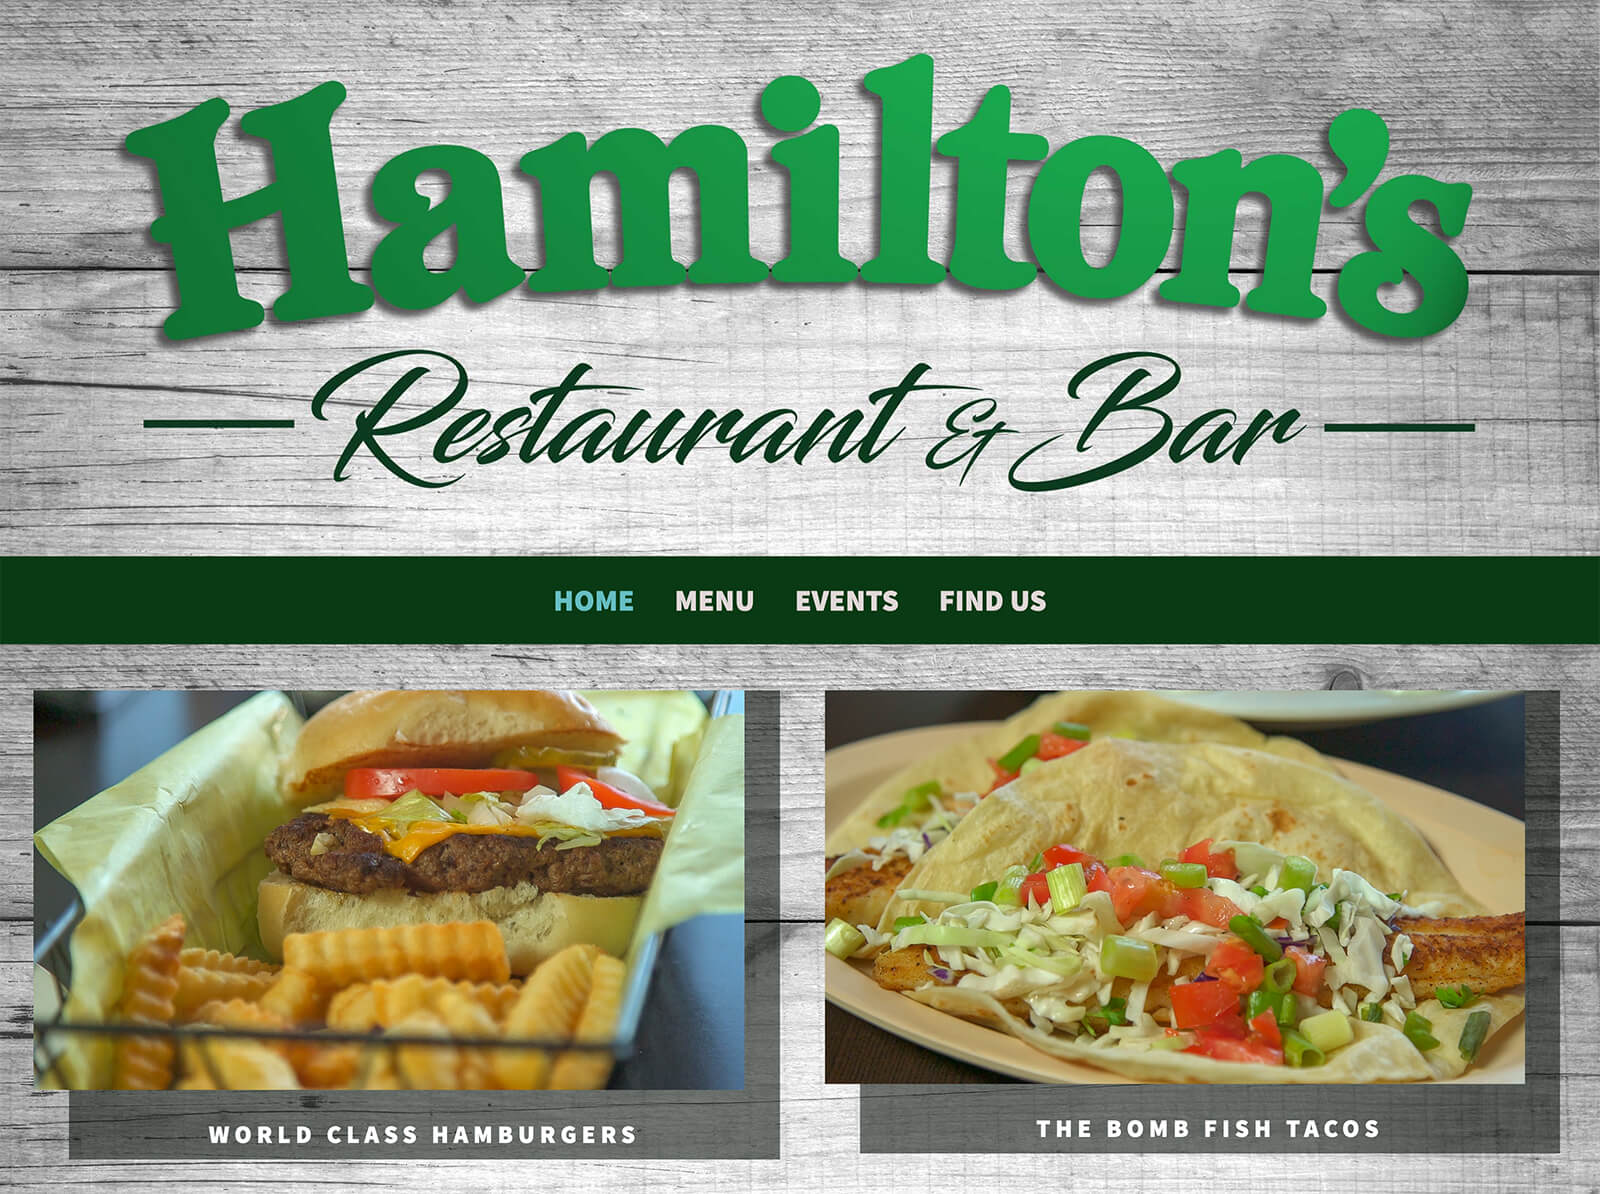 Site with menu feature for restaurant